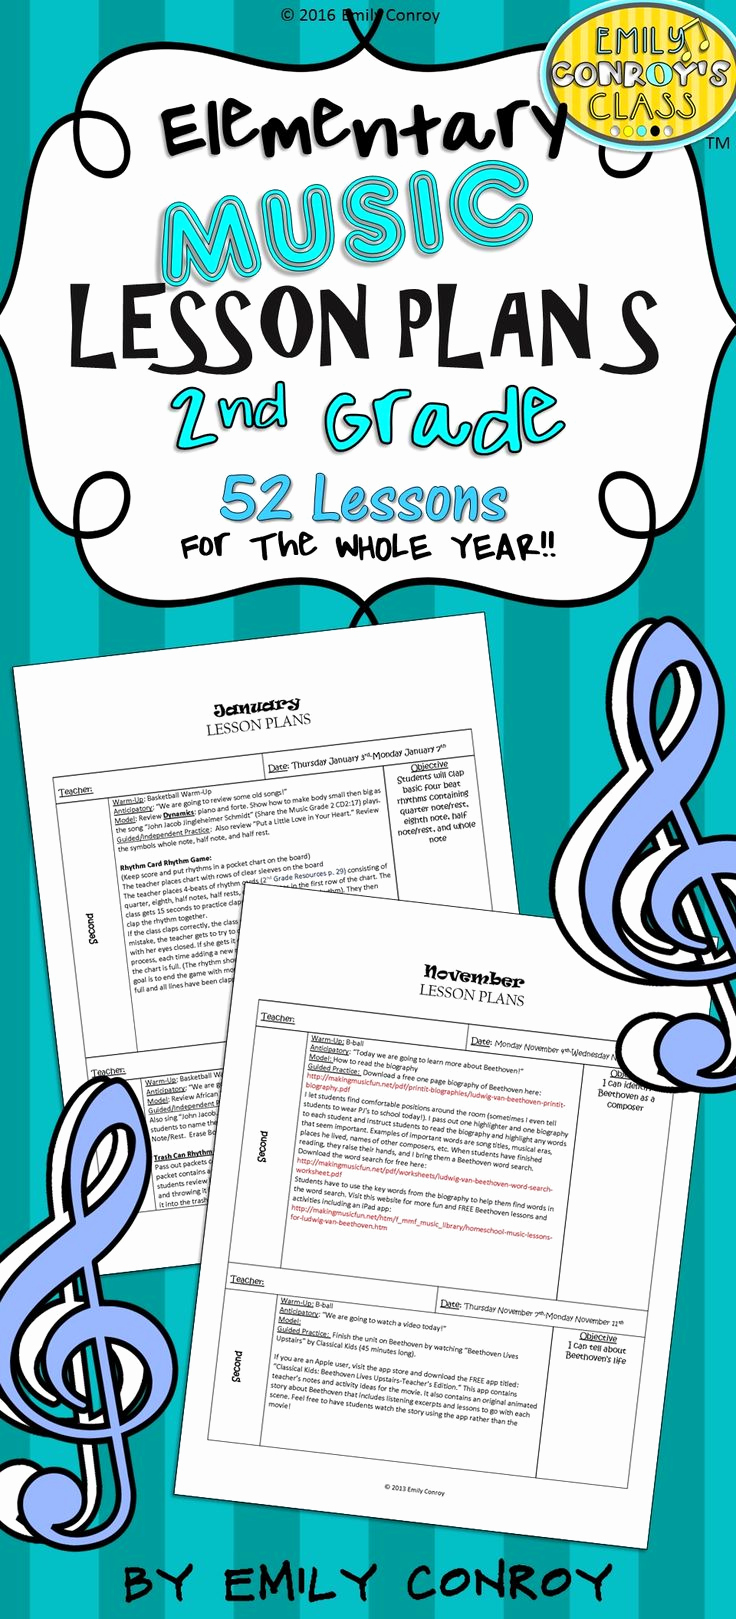 Lesson Plans for toddlers Beautiful Second Grade Music Lessons Plans these Plans are Creative